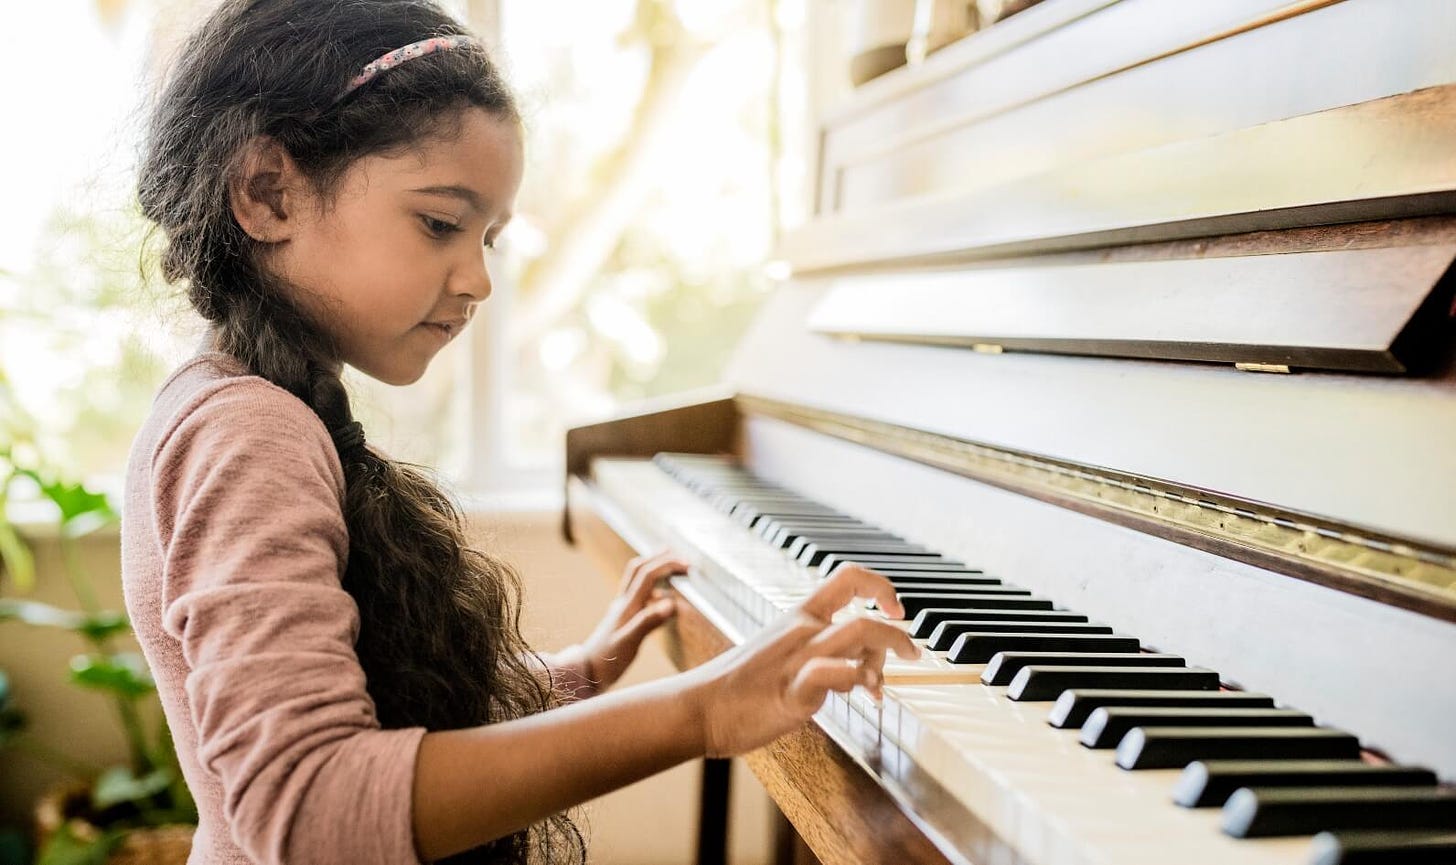 What's the Right Age to Begin Music Lessons? |… | PBS KIDS for Parents